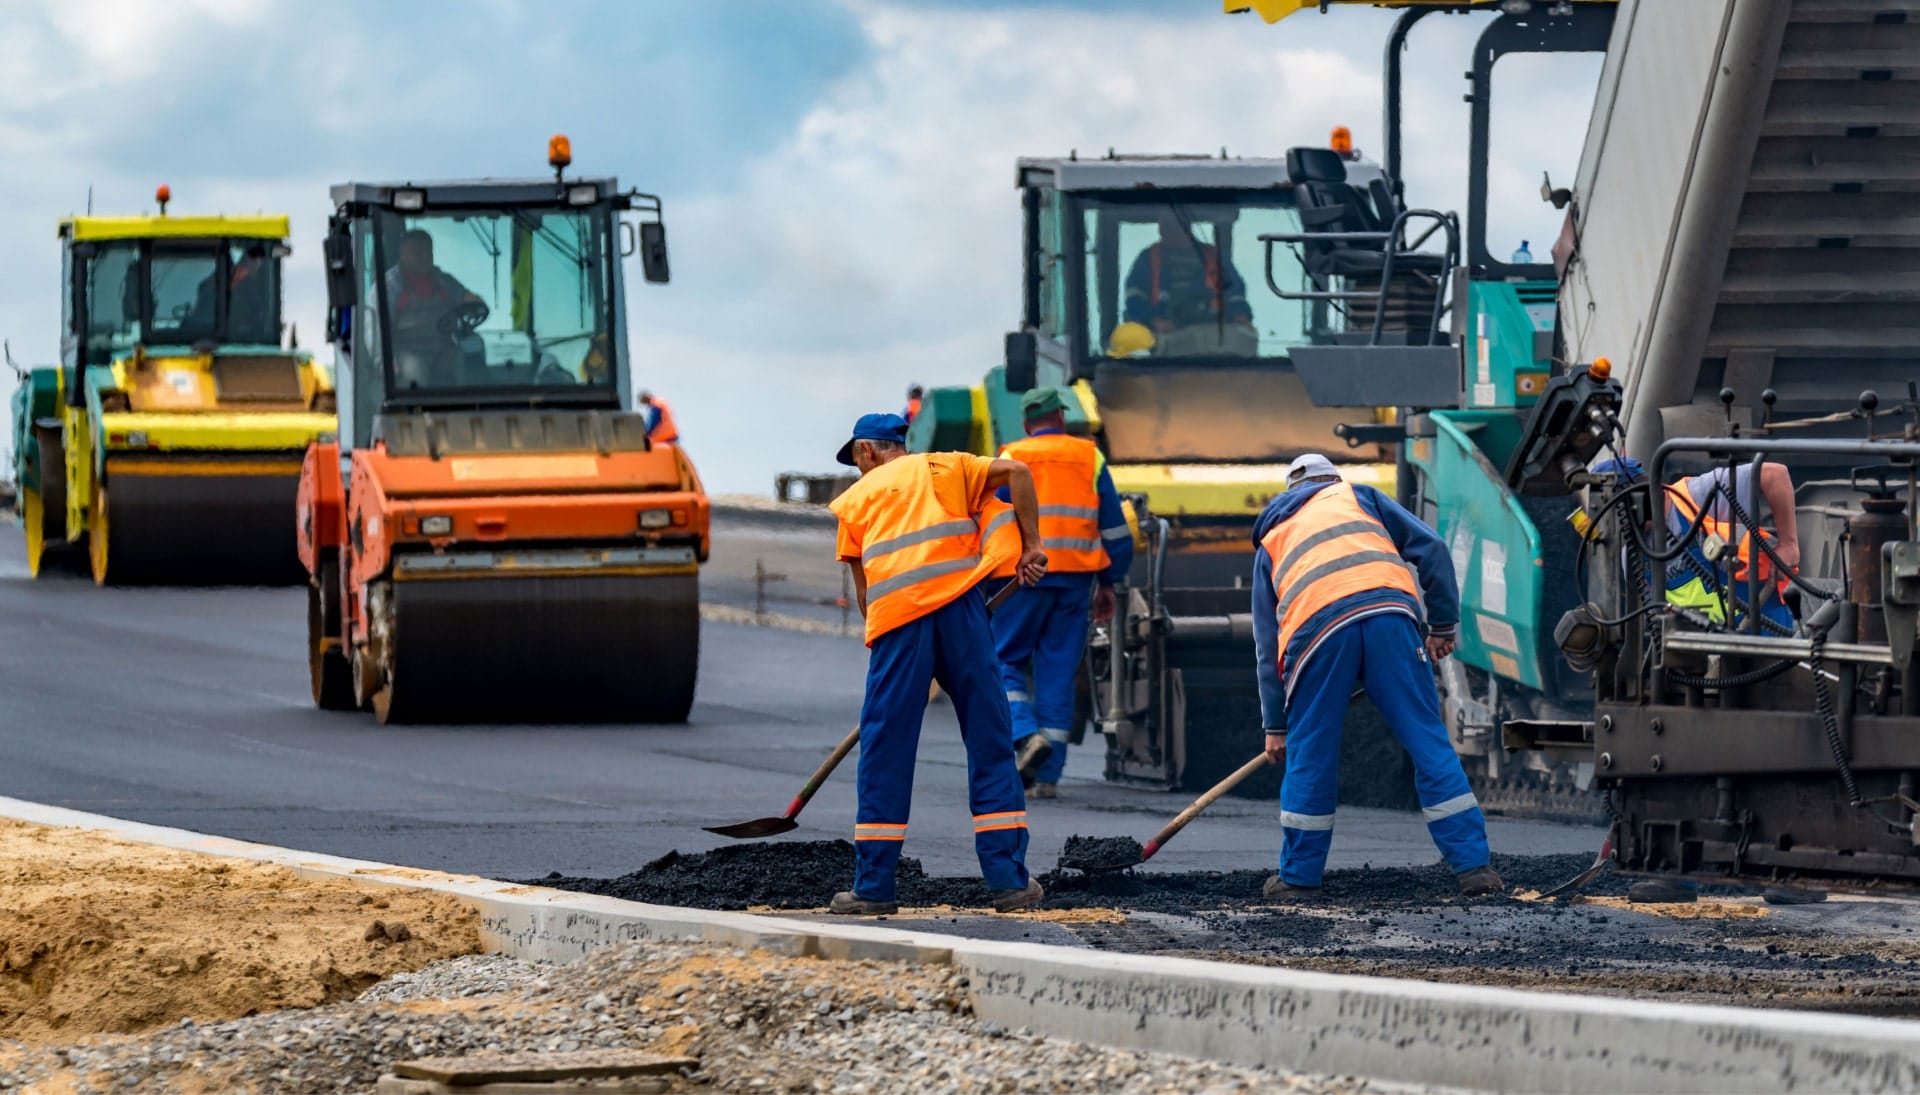 Reliable asphalt construction services in Bangor, ME for various projects.